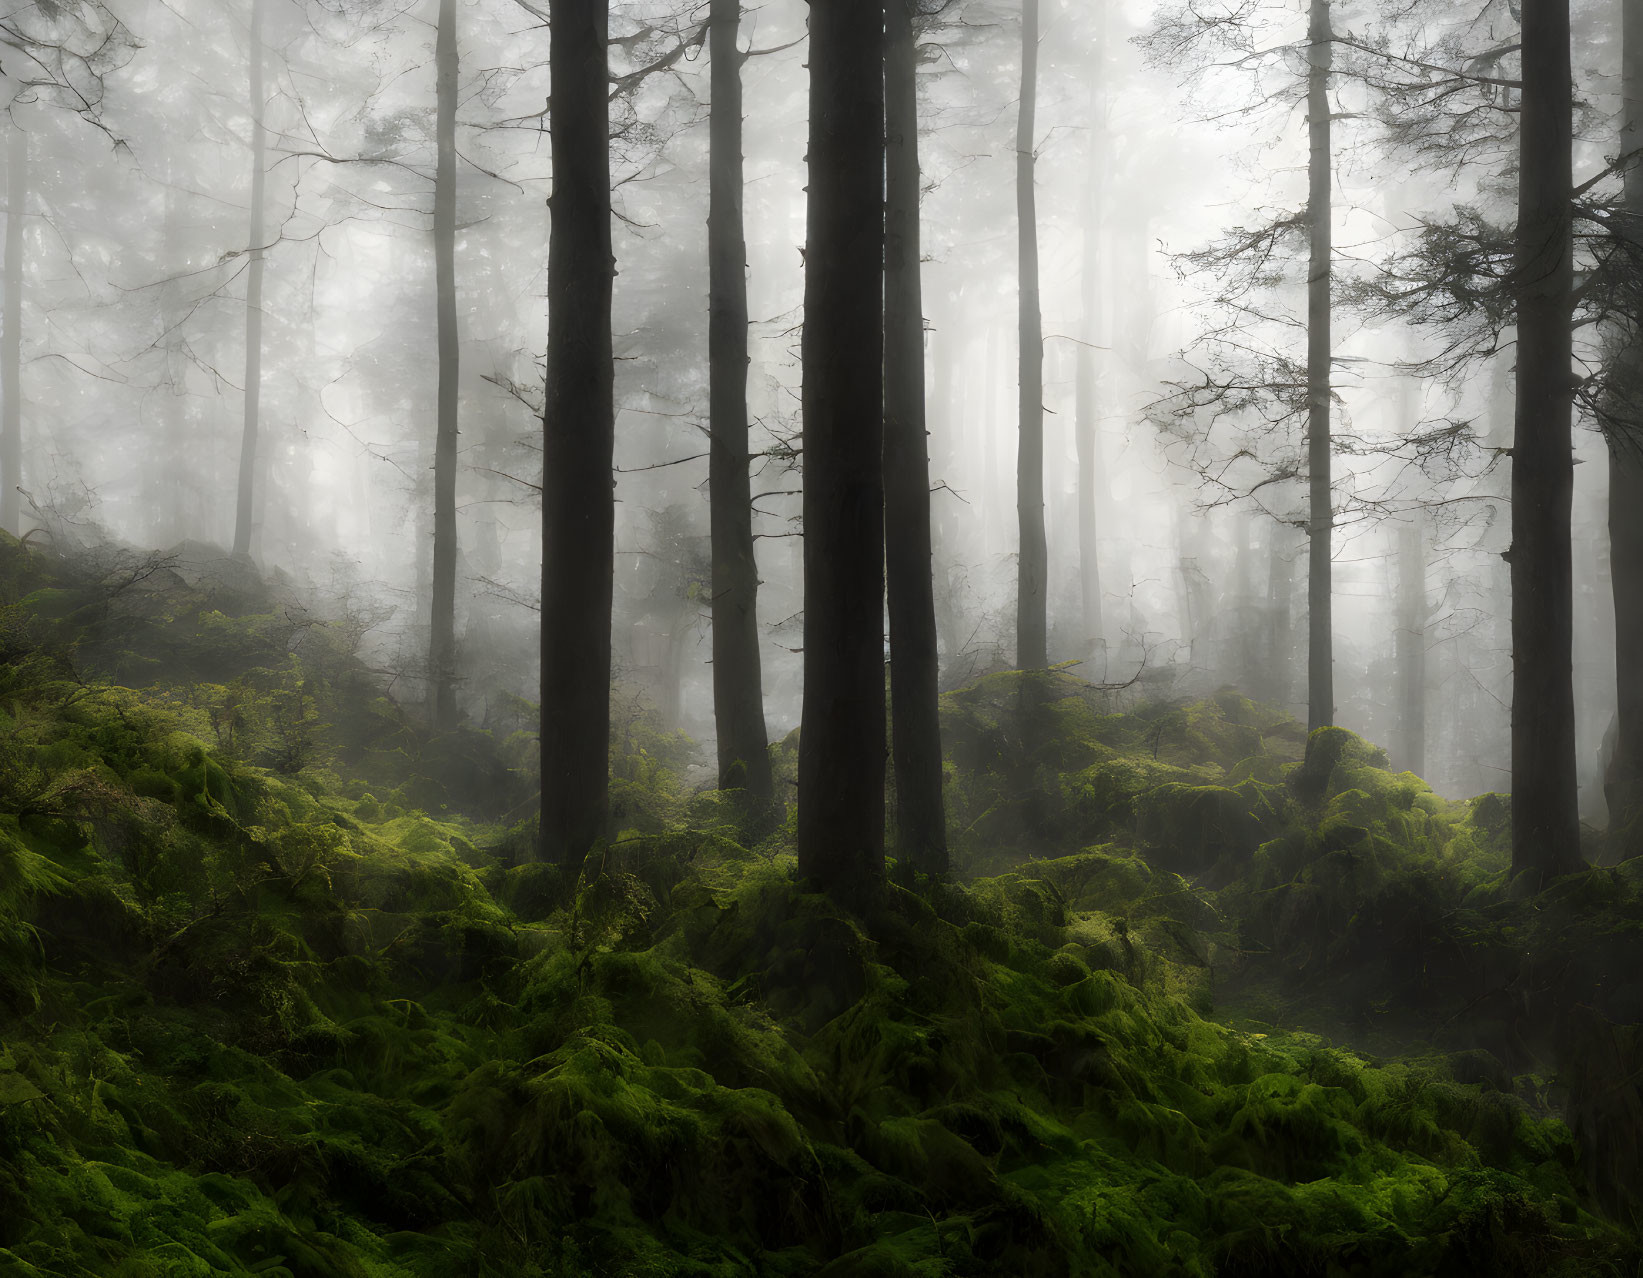 Misty forest with tall trees and lush green moss carpet